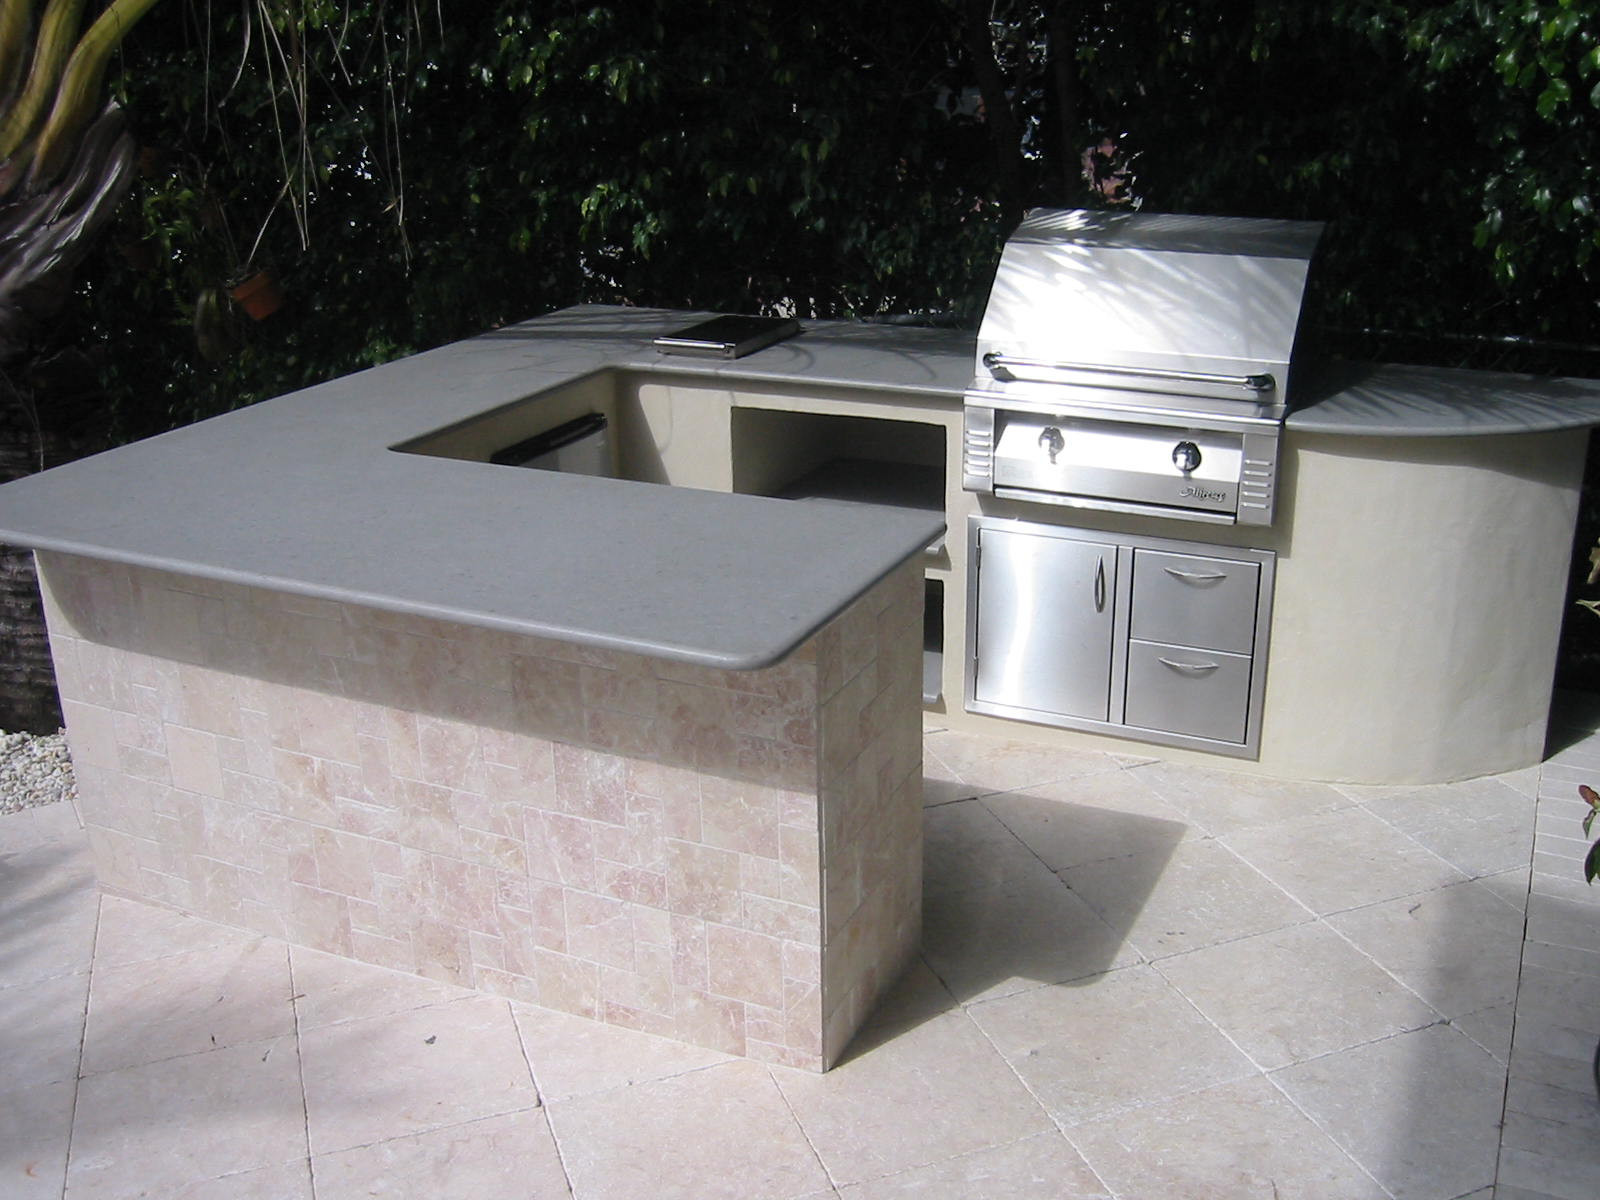 Gas Grill For Outdoor Kitchen
 built in alfresco gas grill outdoor kitchen — Gas Grills